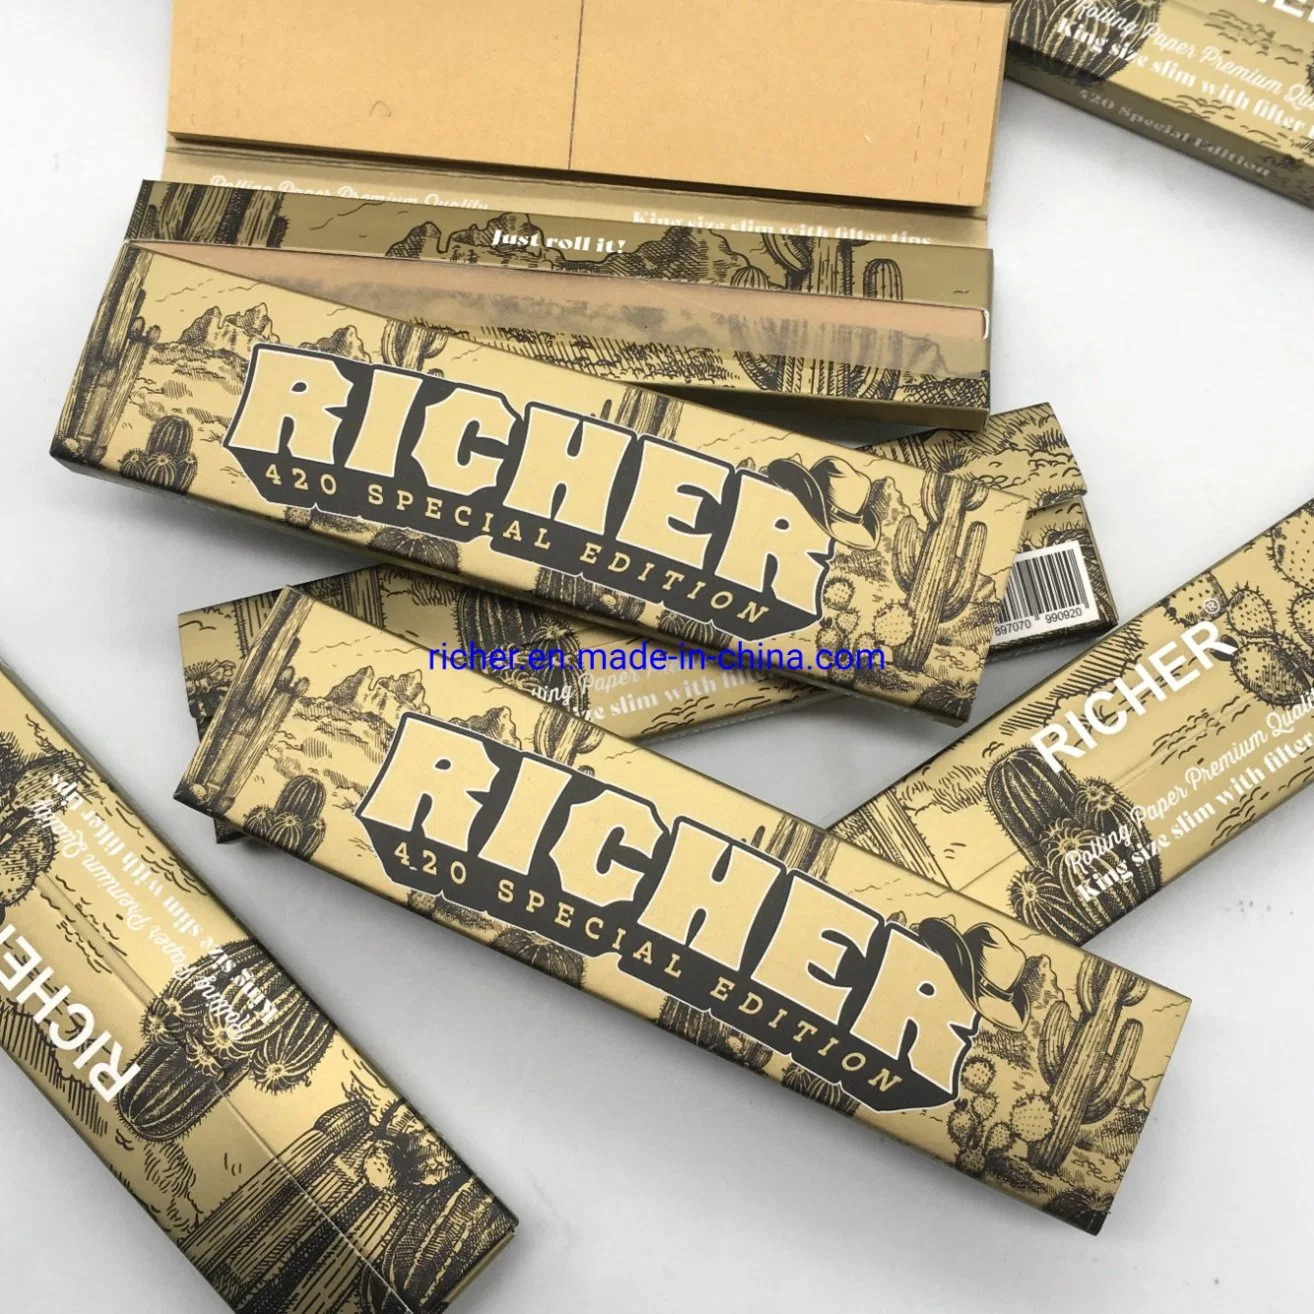 Richer 420 Smoking Rolling Paper King Size Slim Unbleached Paper with Filters